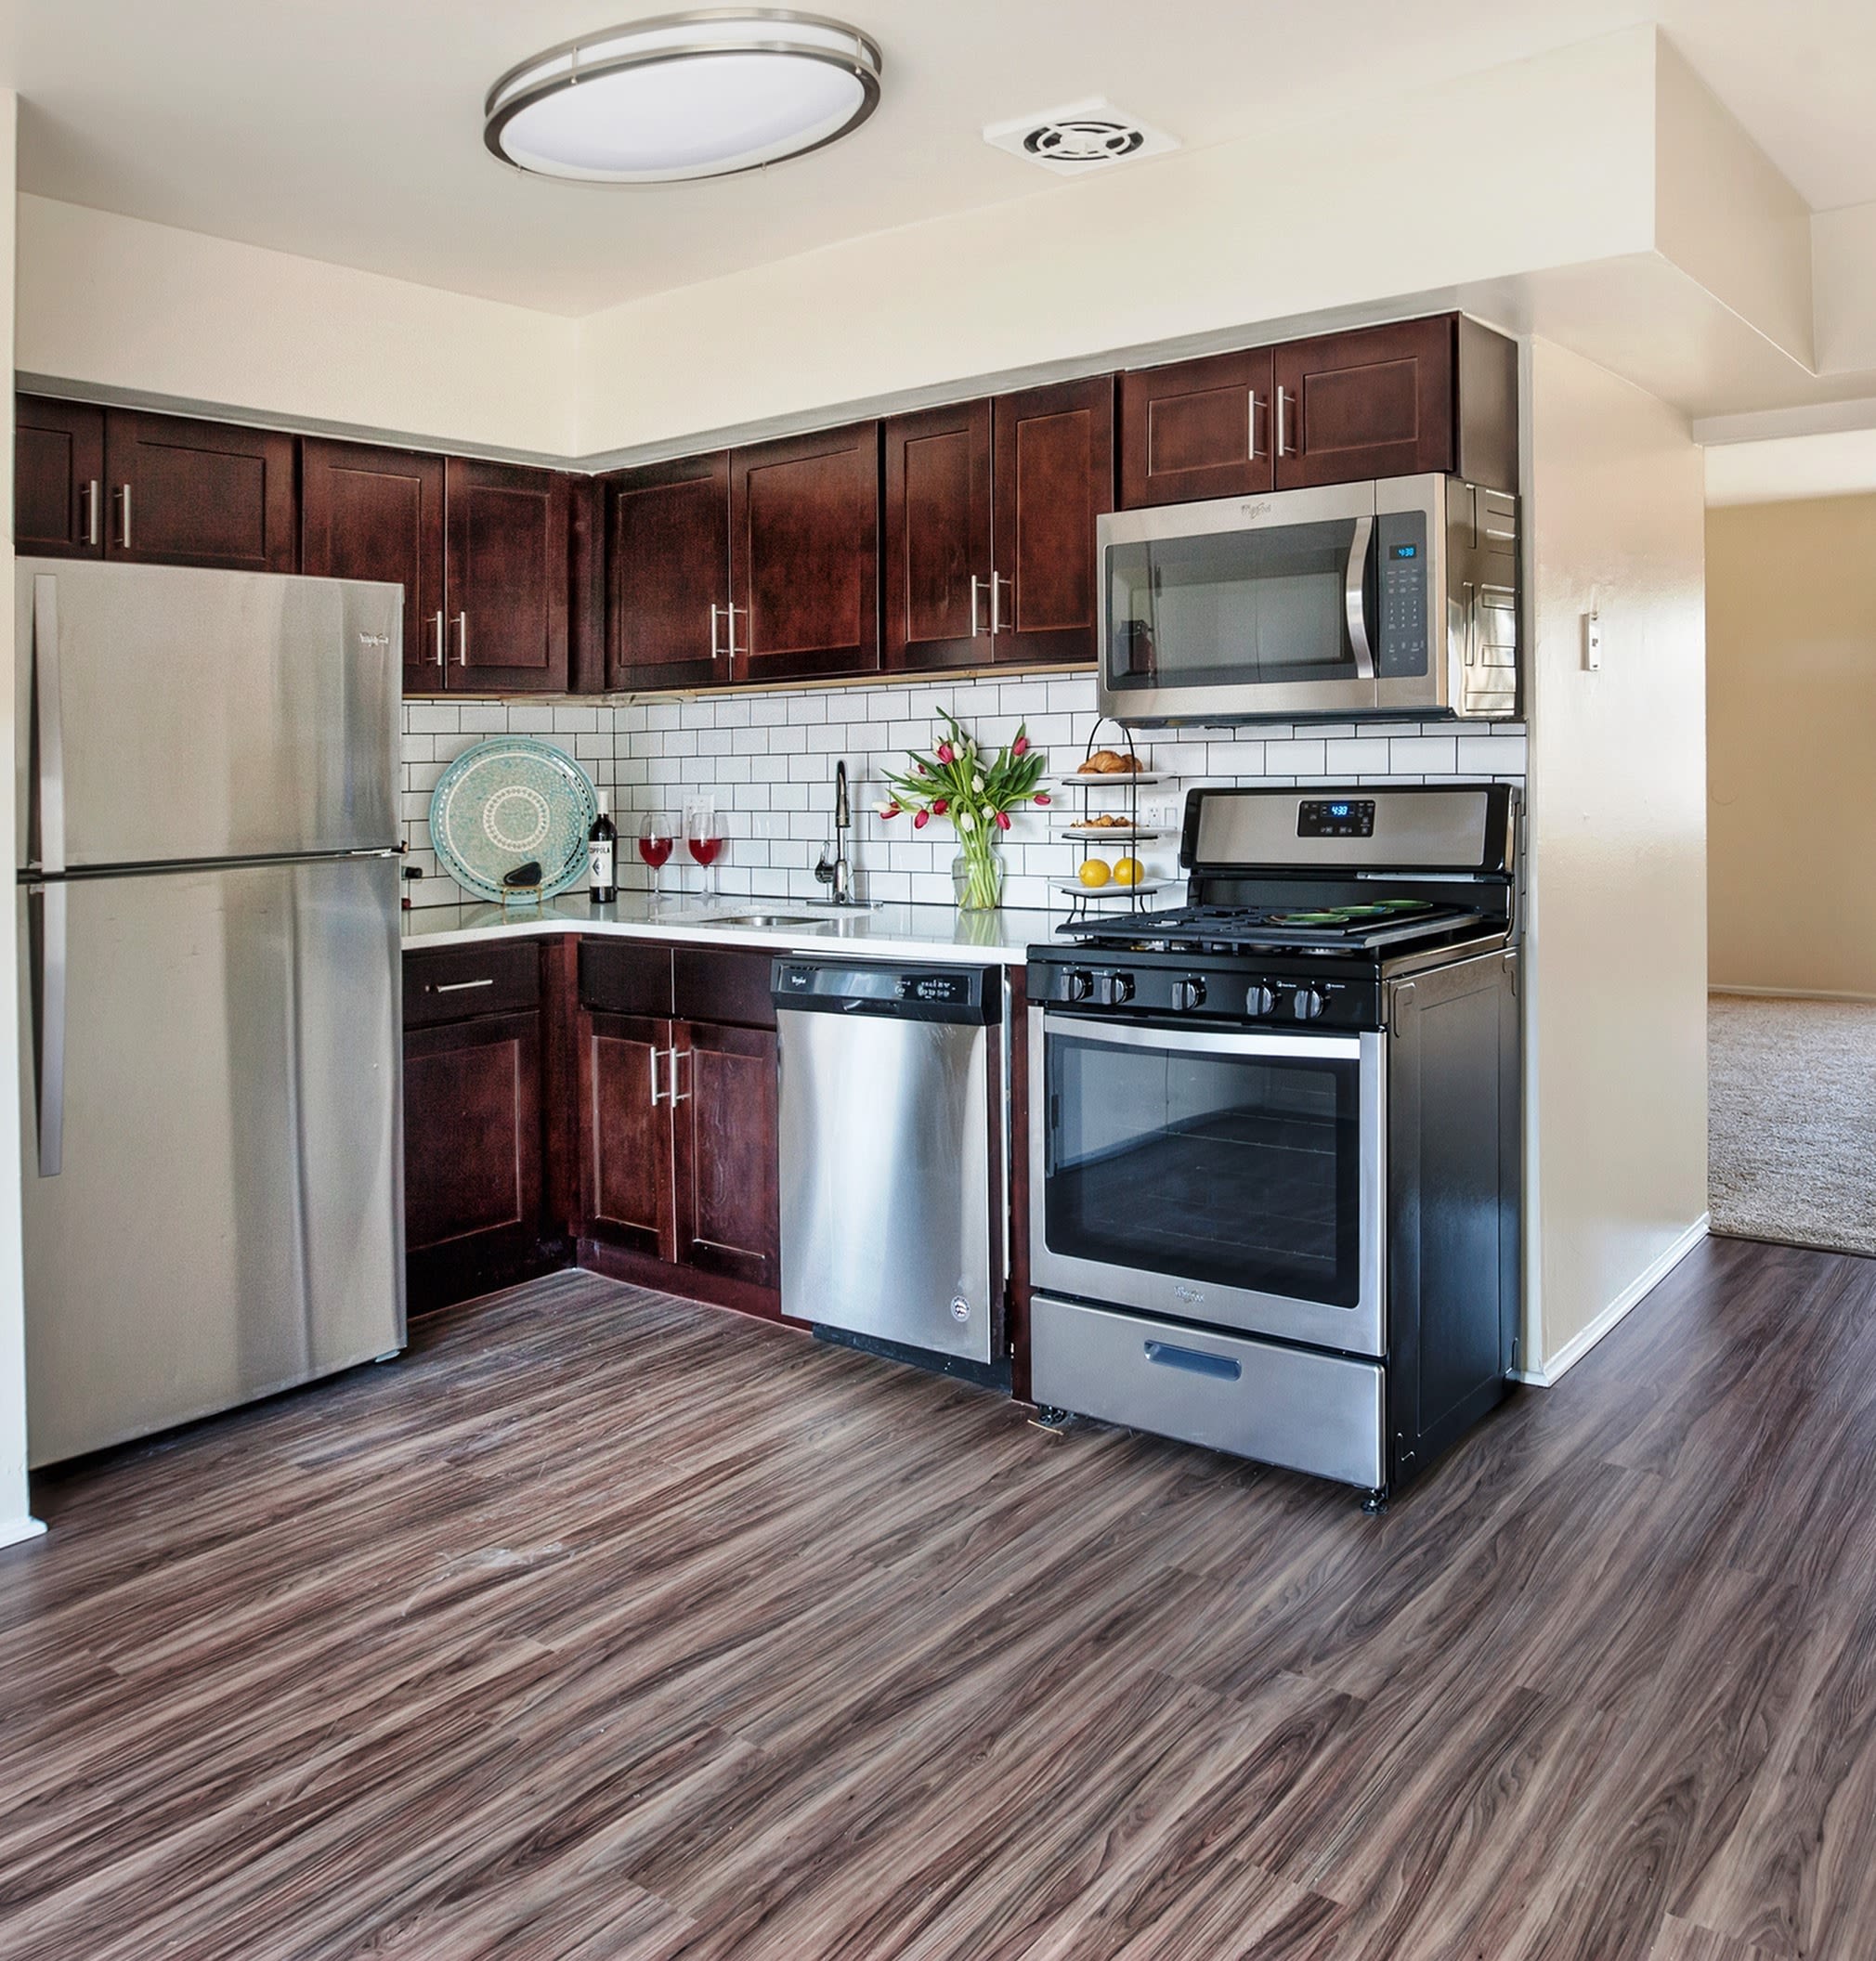 model kitchen with stainless-steel appliances and wood style flooring at Franklin Commons in Bensalem, Pennsylvania